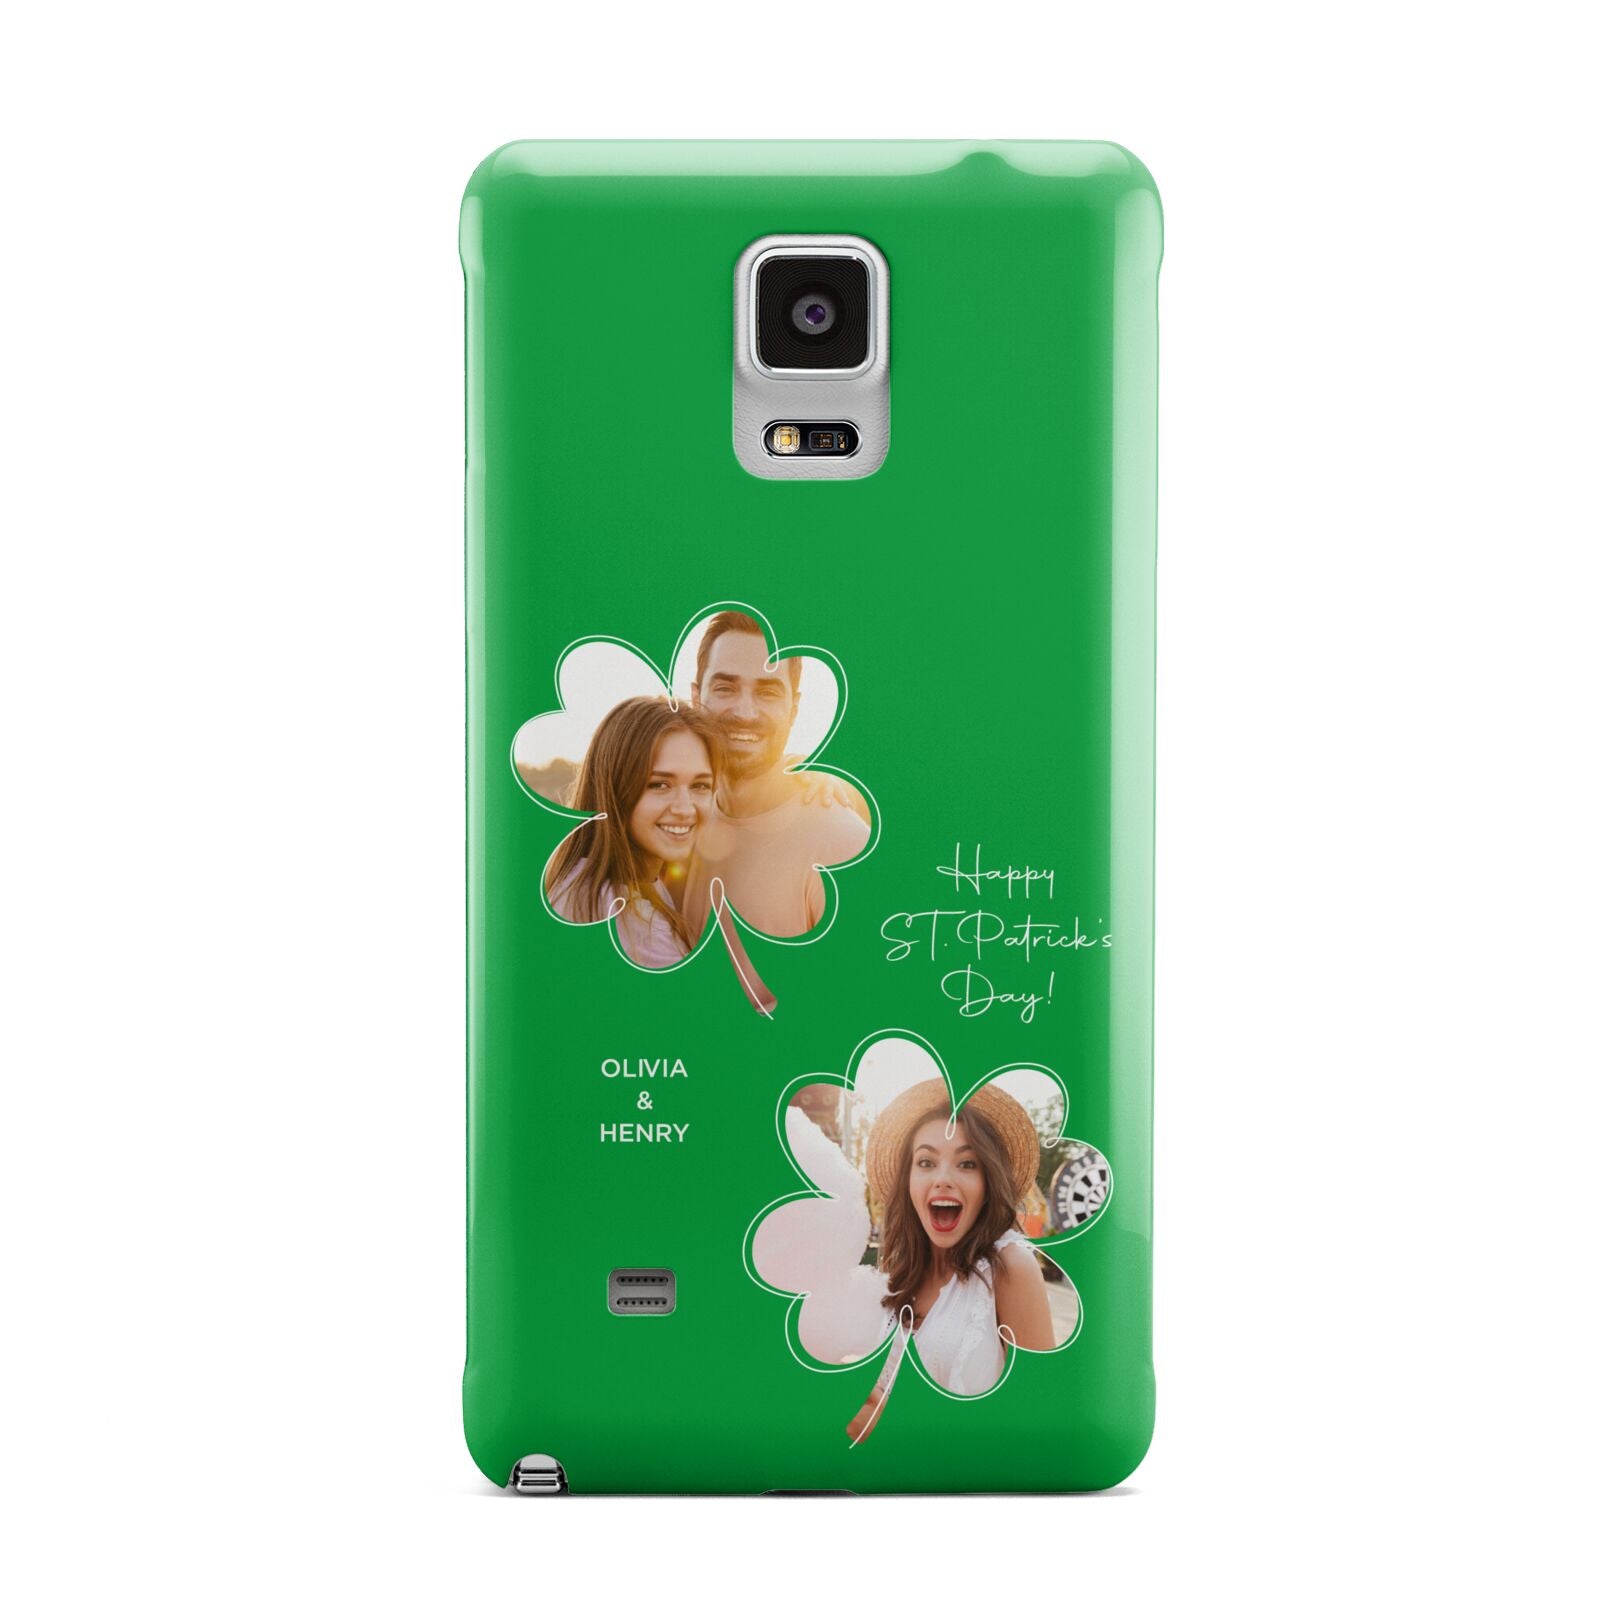 Personalised Photo St Patricks Day Samsung Galaxy Note 4 Case